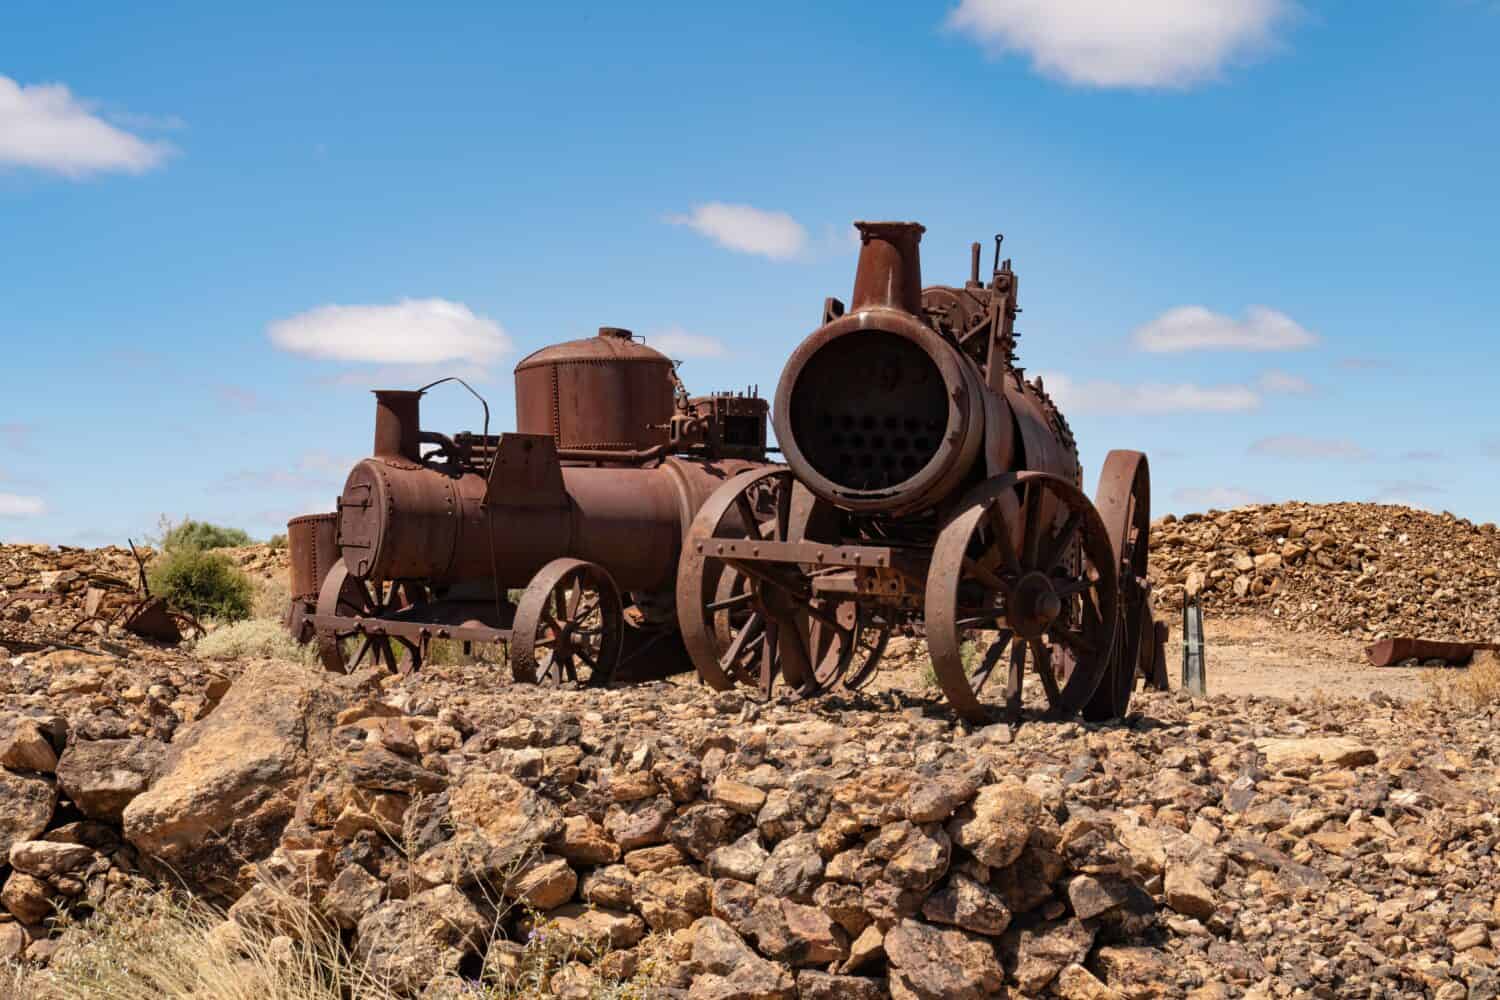 Two old mining steam engines in the desert at Silverton, New South Wales, Australia. Fluffy white clouds in blue sky.